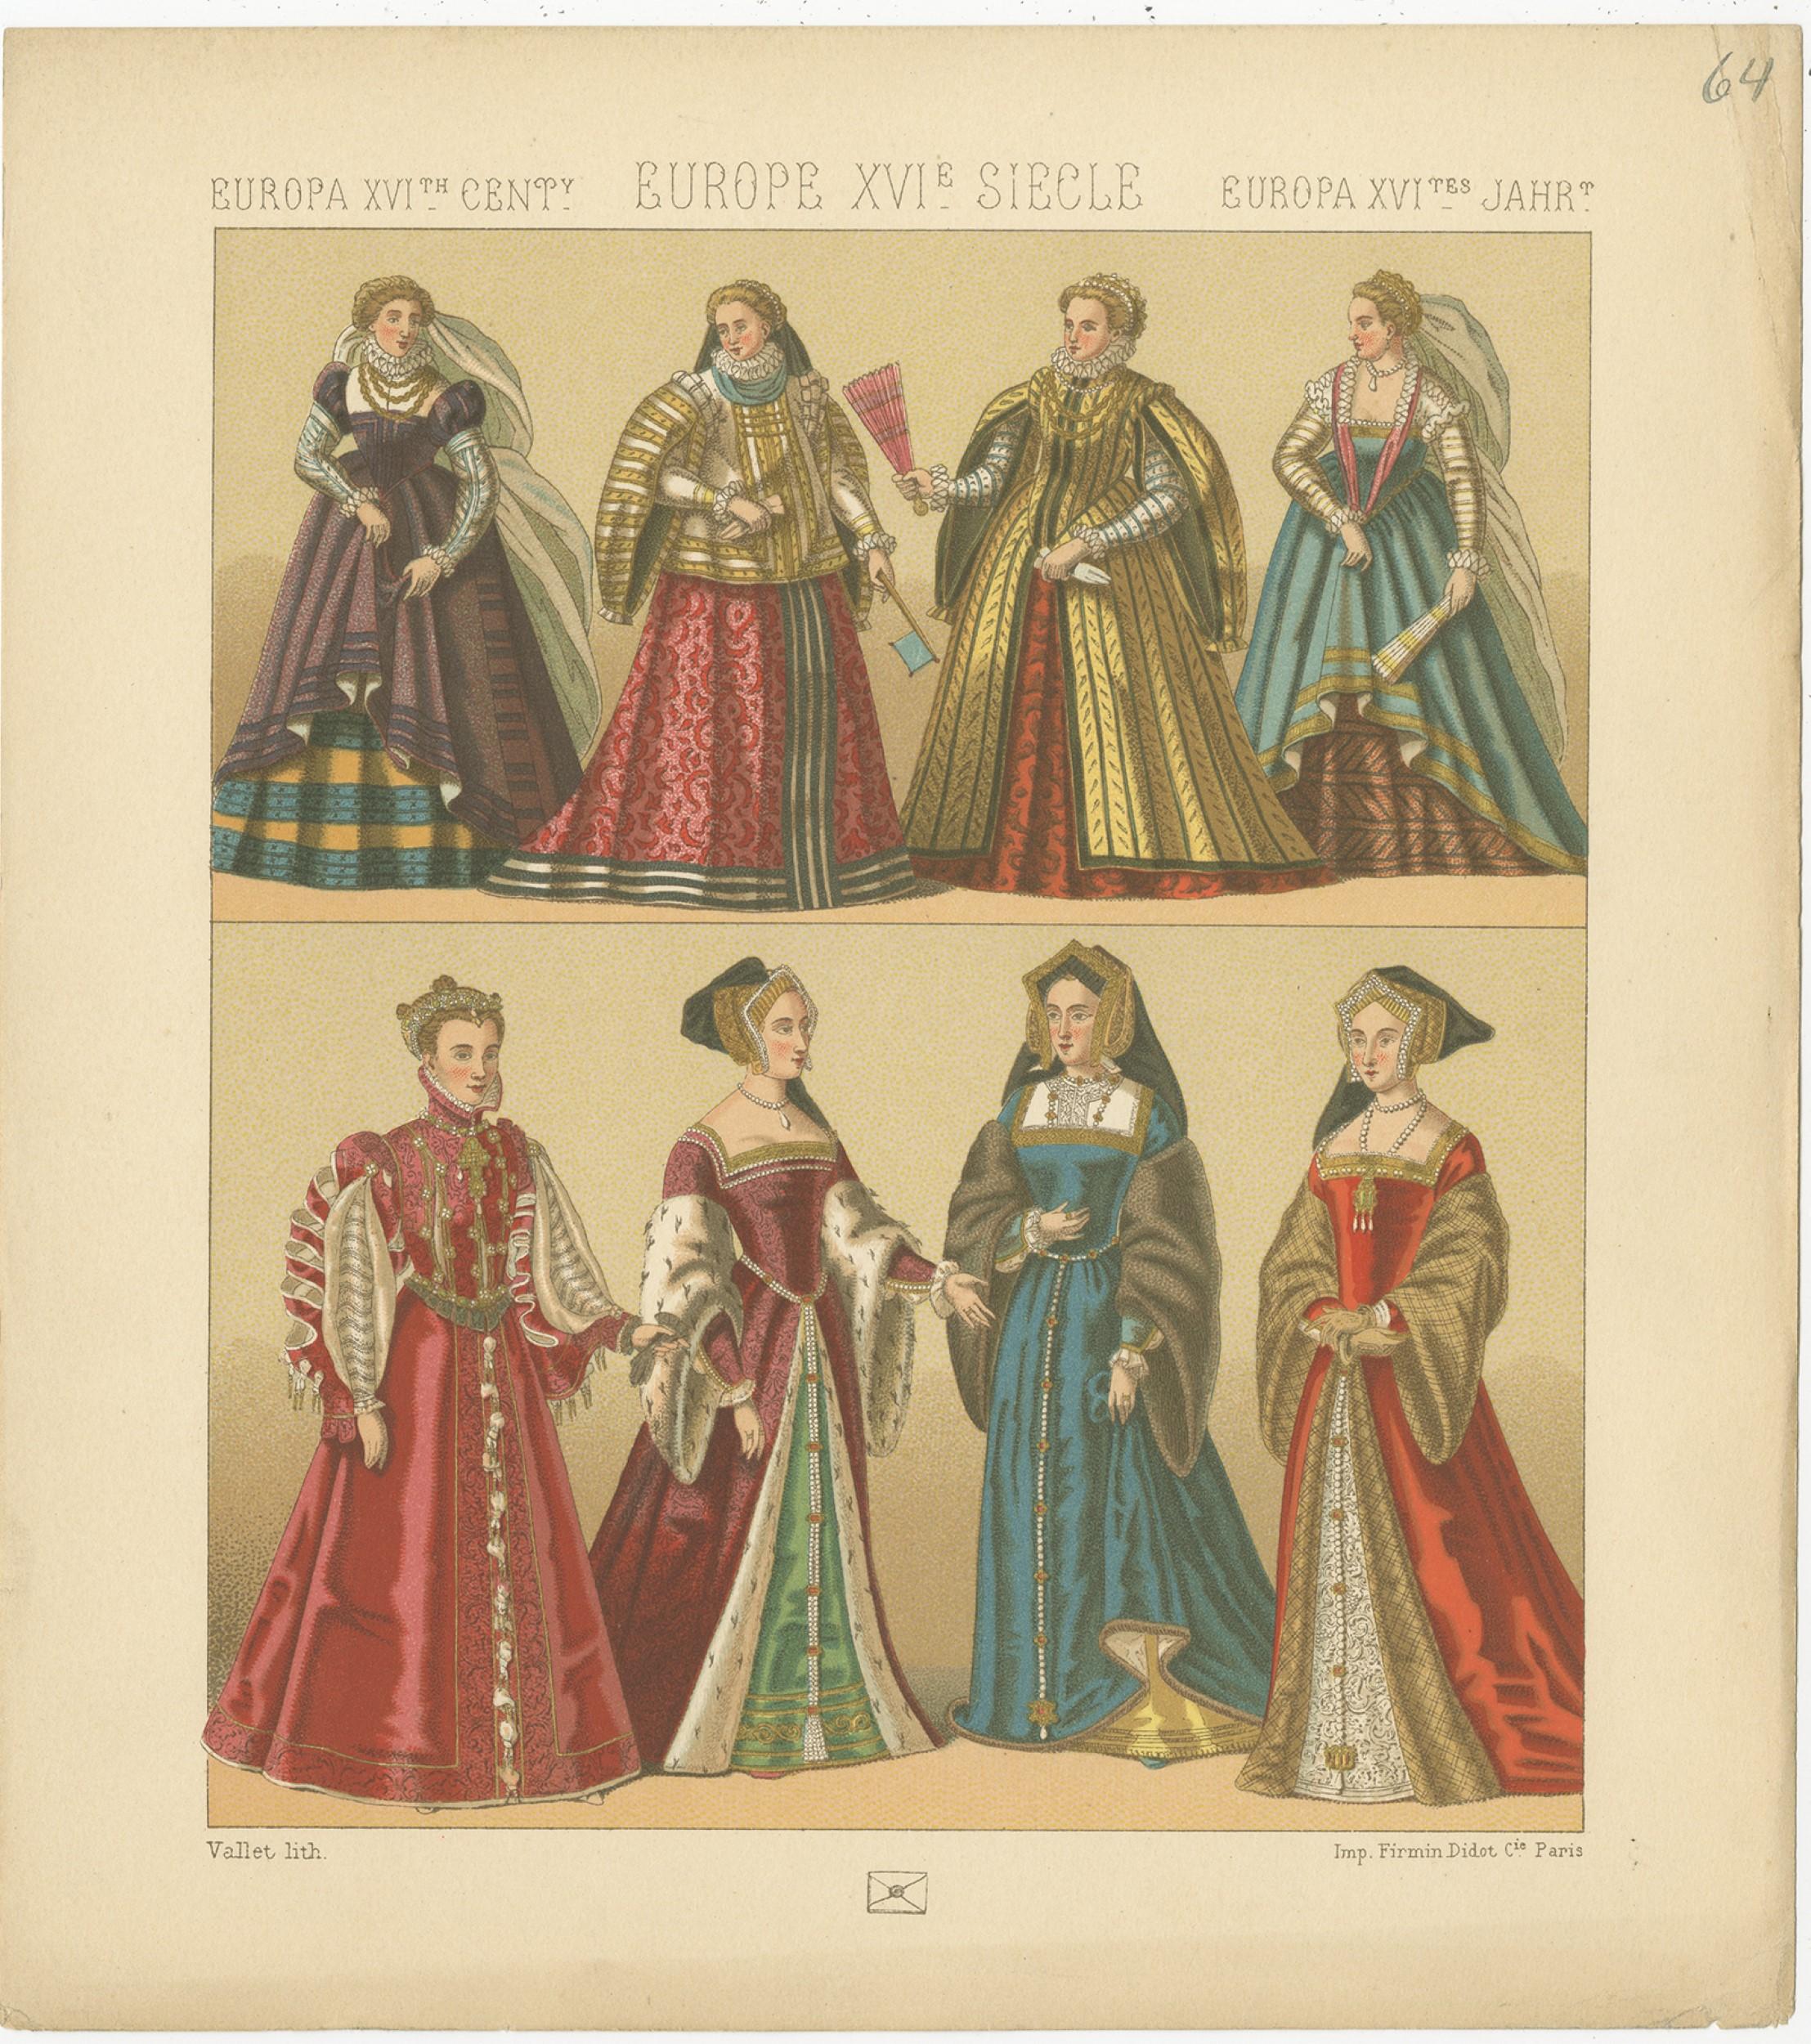 Antique print titled 'Europa XVI Cent - Europe XVIe Siecle - Europa XVItes Jahr'. Chromolithograph of European XVIth Century Costumes. This print originates from 'Le Costume Historique' by M.A. Racinet. Published, circa 1880.